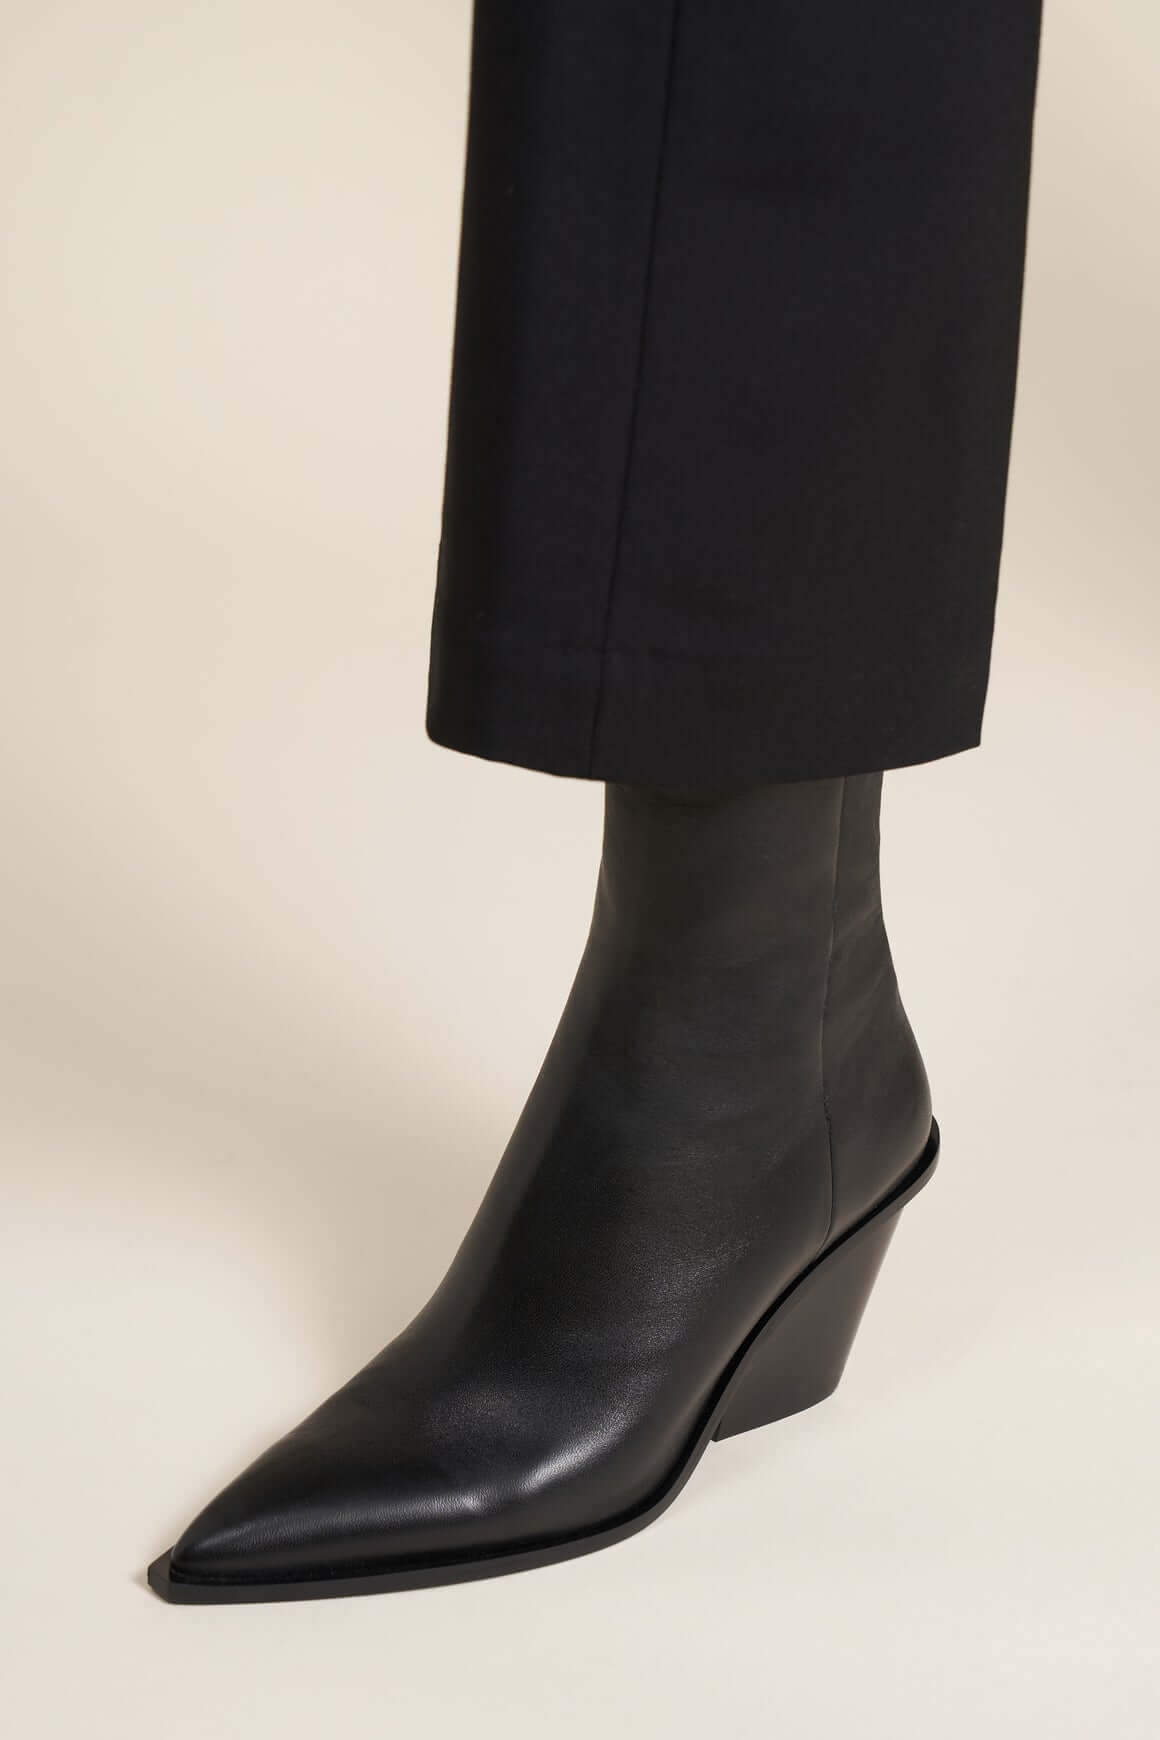 A.Emery Odin Boot in Black available at TNT The New Trend